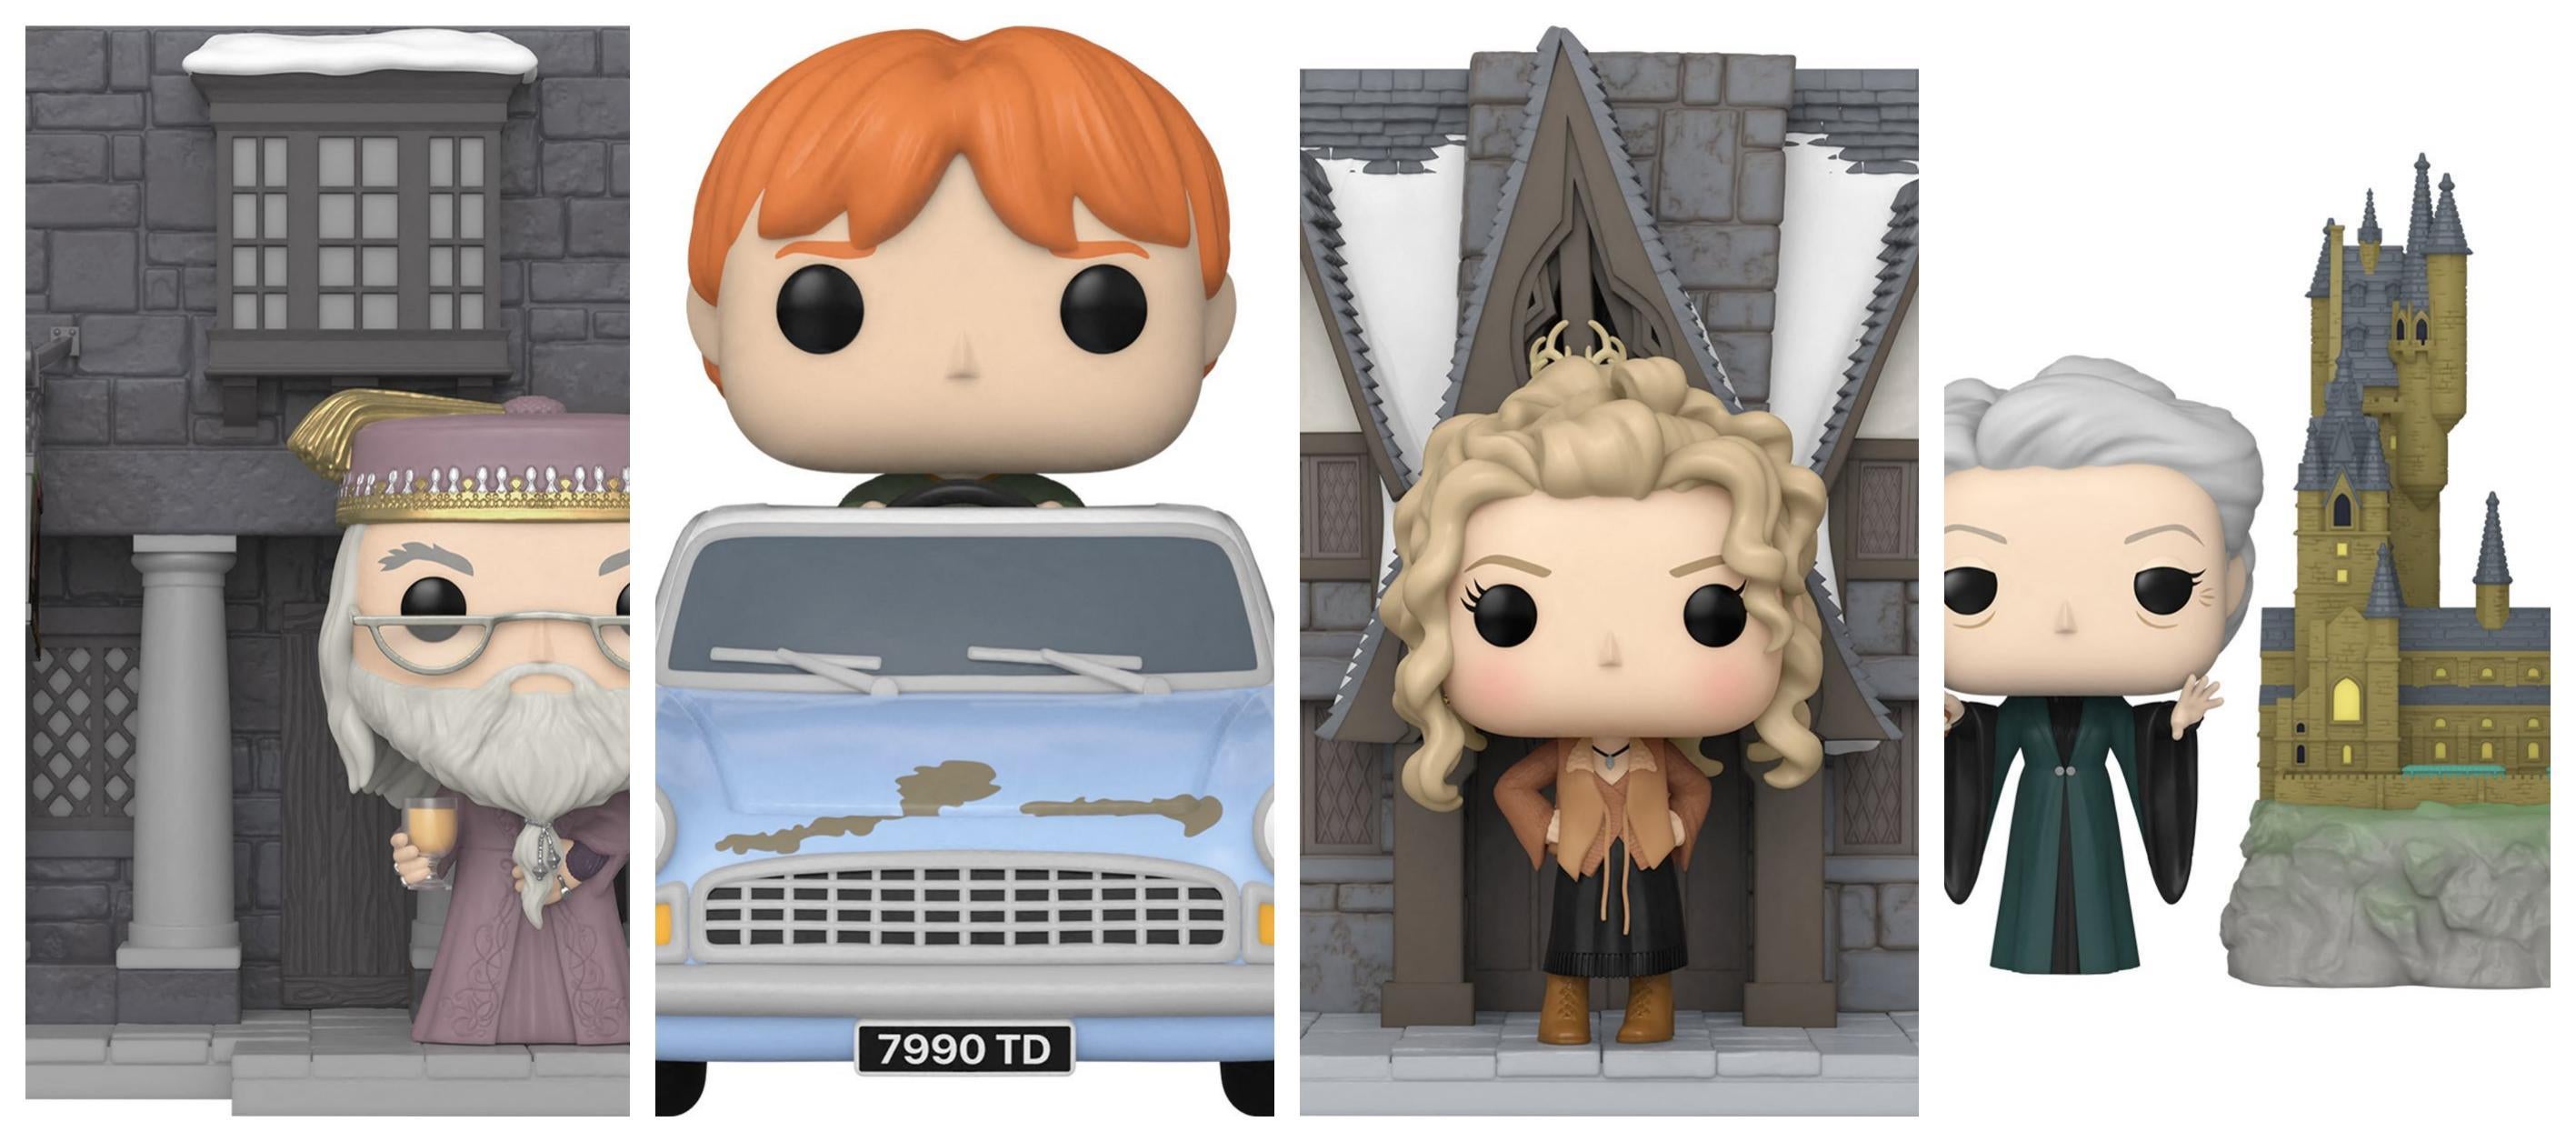 Harry Potter Chamber of Secrets 20th Anniversary Funko Pop Wave Is